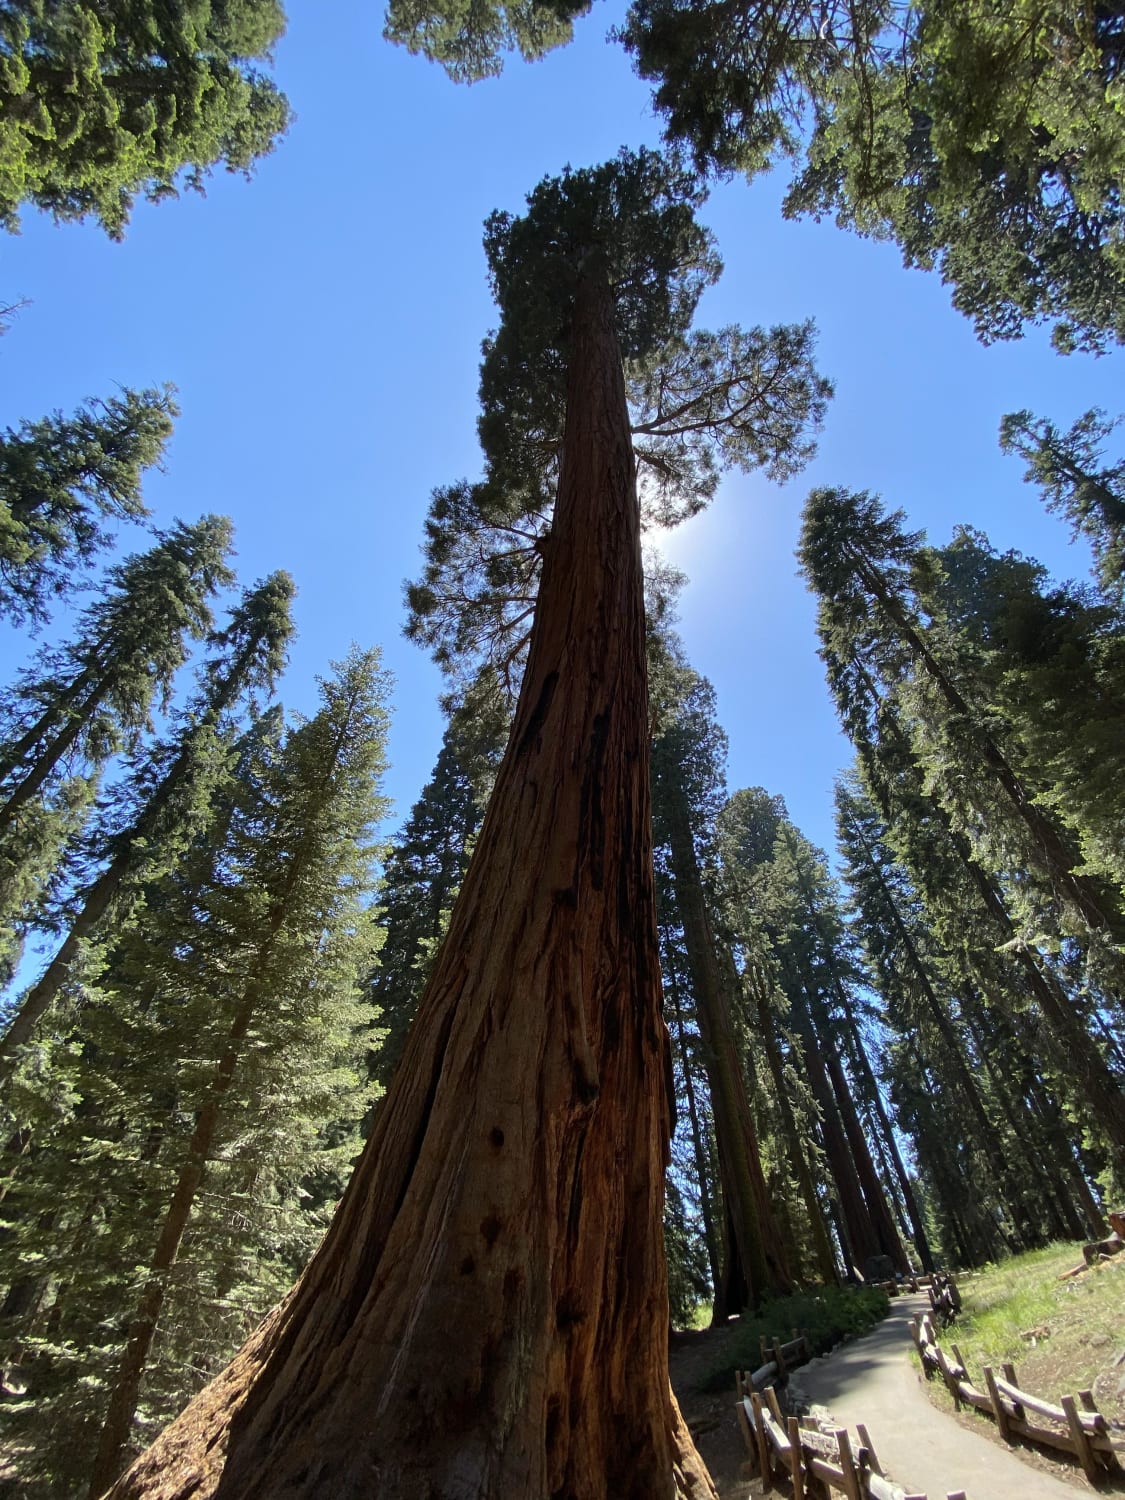 Went hiking among giants in Sequoia National Park, CA.